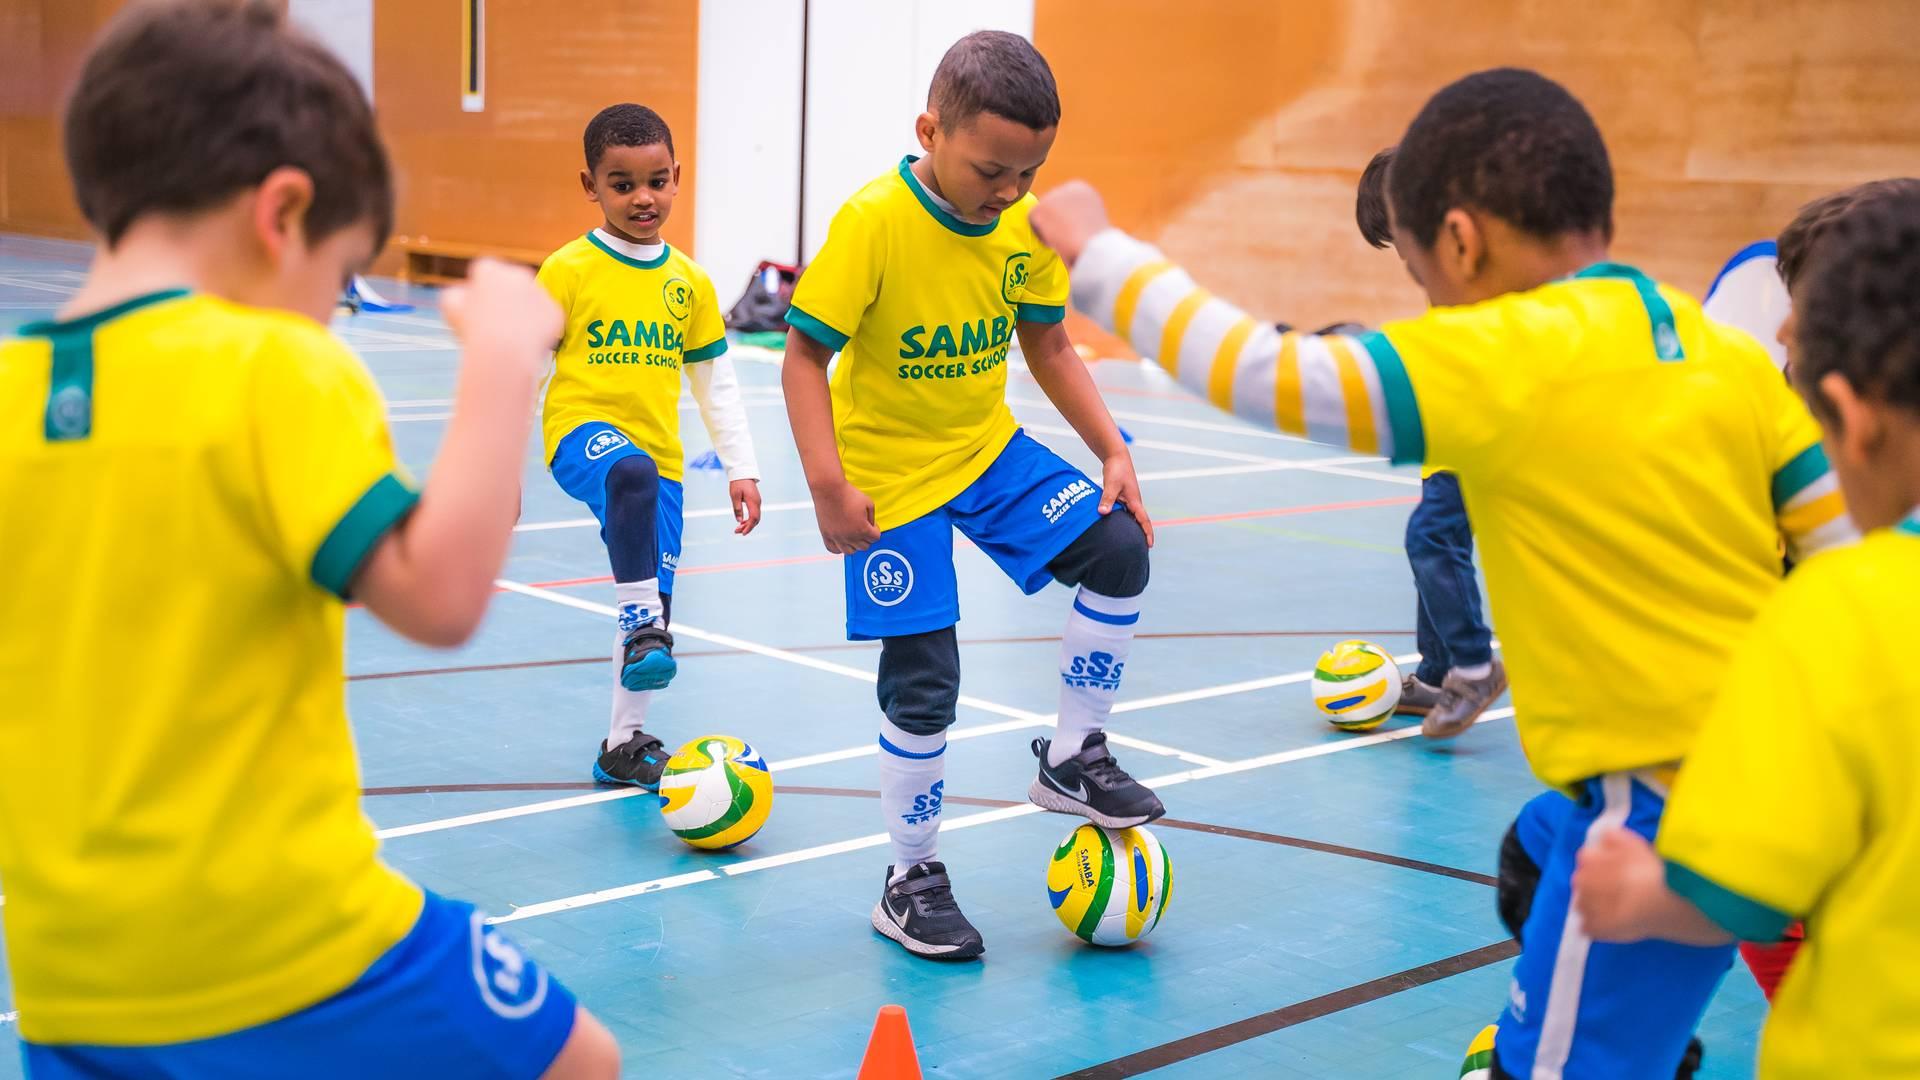 [Finchley] Football Classes for Kids aged 4-12 photo